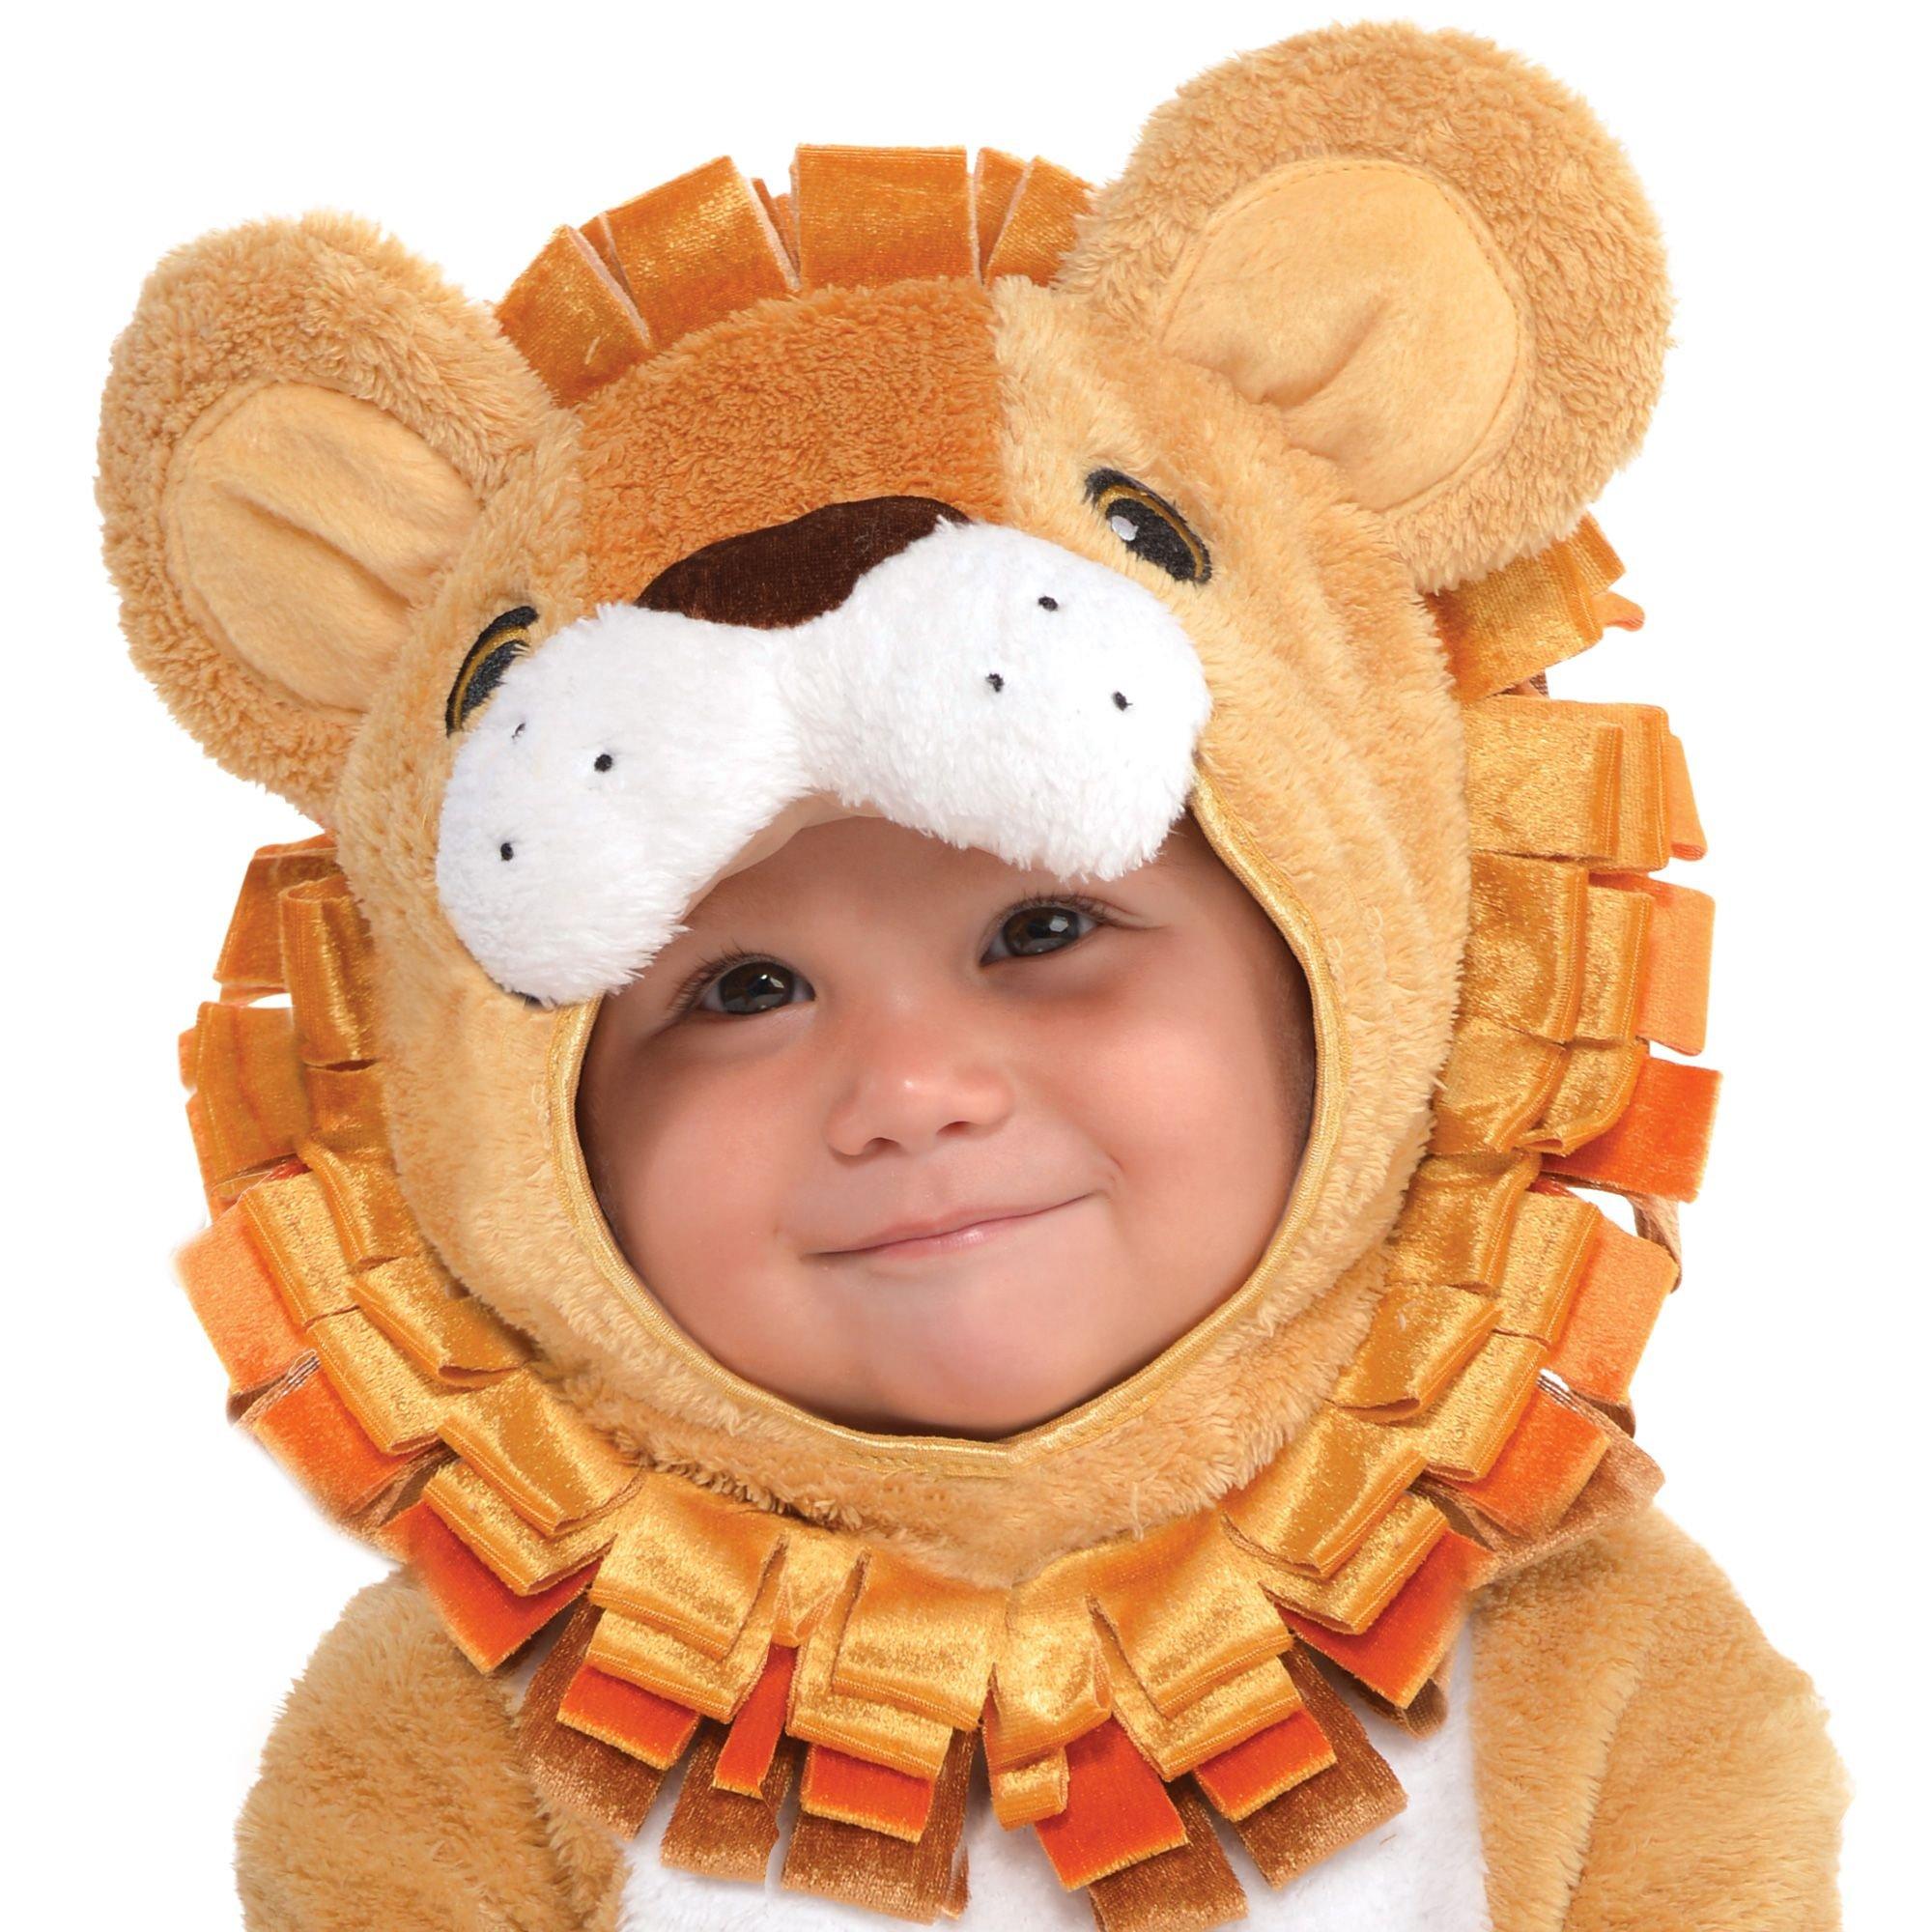 Baby Cowardly Lion Costume - The Wizard of Oz | Party City